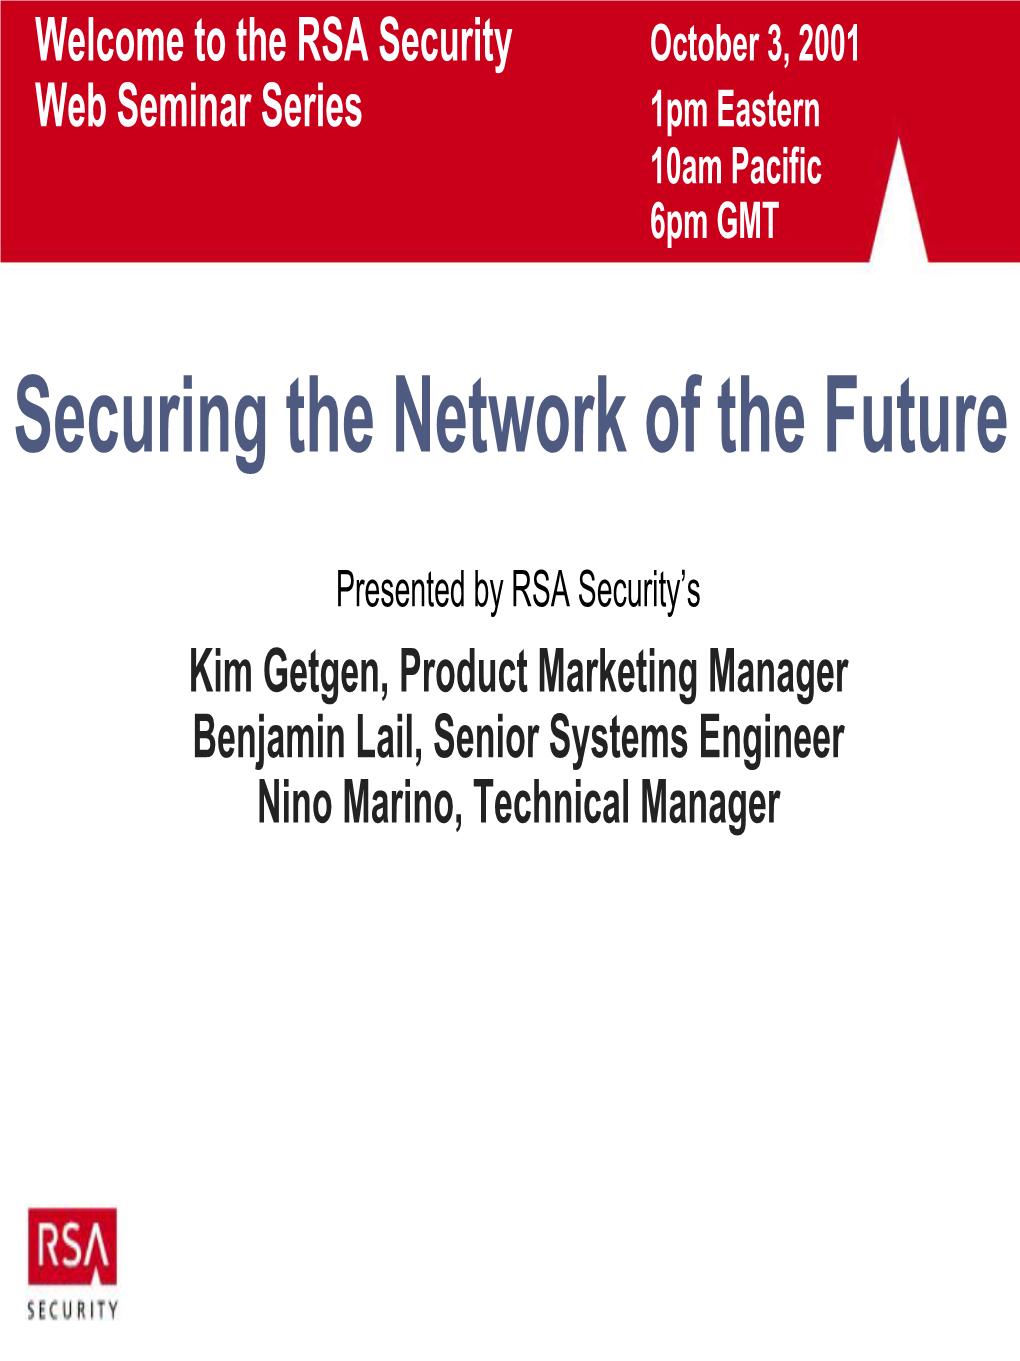 Securing the Network of the Future